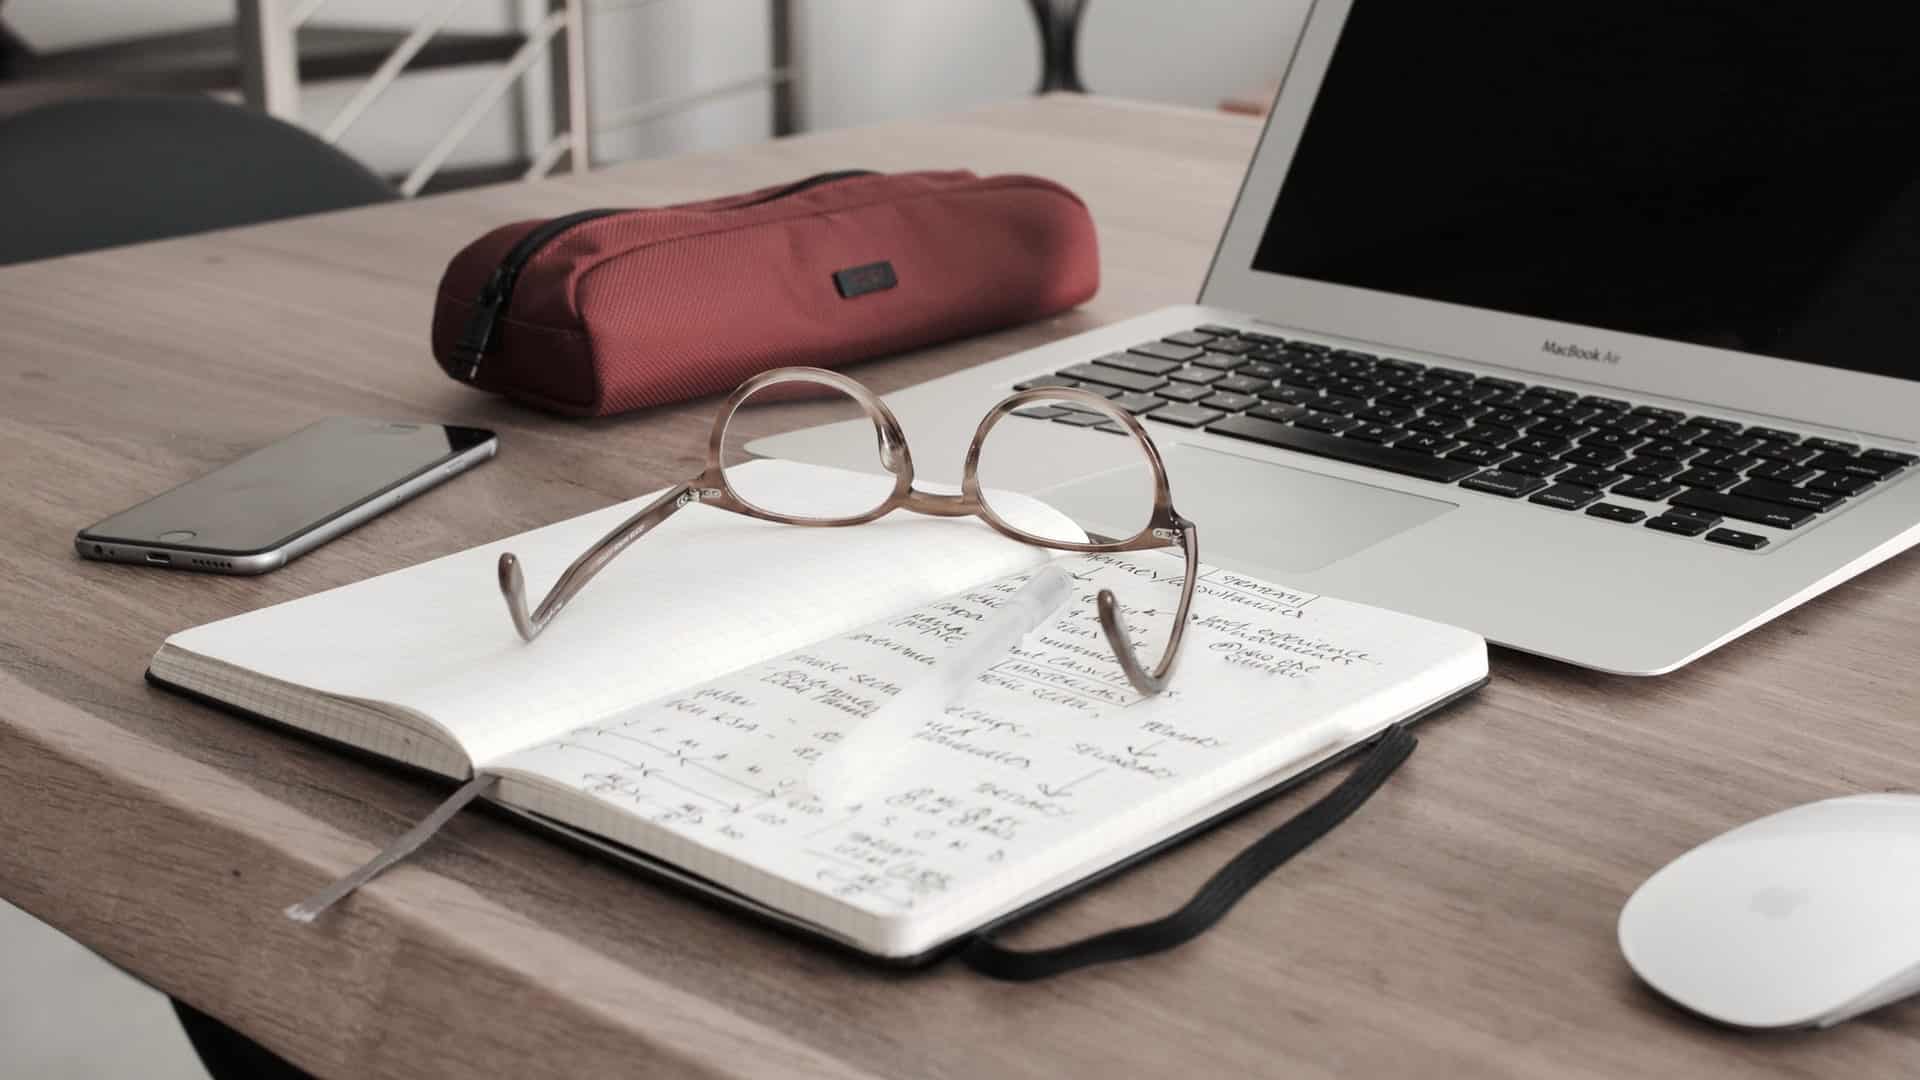 Image shows glasses on a notebook and an open laptop, illustrating the concept of academia.